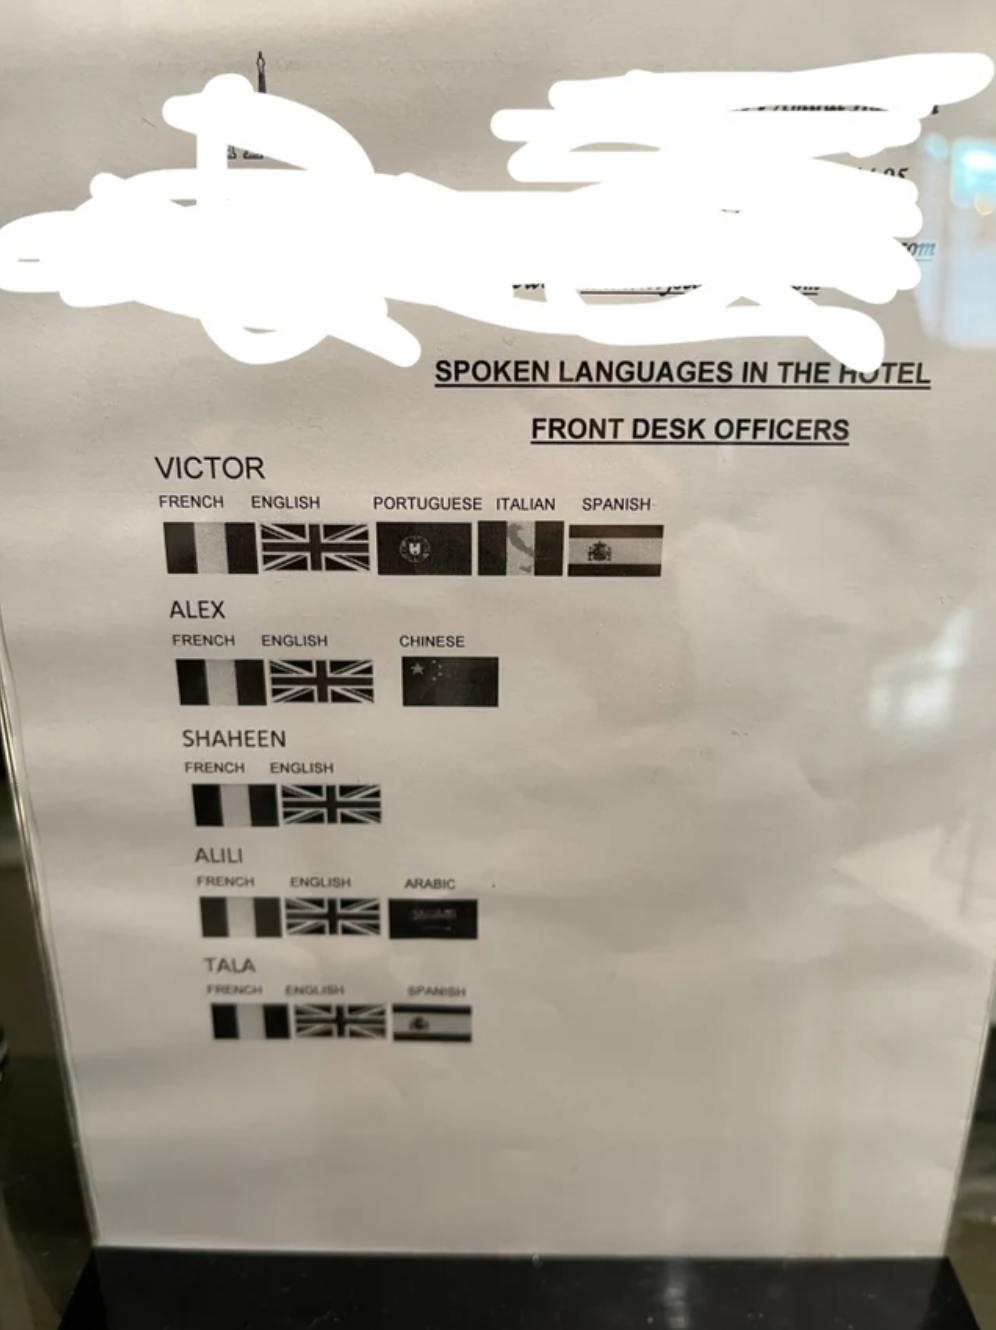 A sign listing the employees and what languages they speak